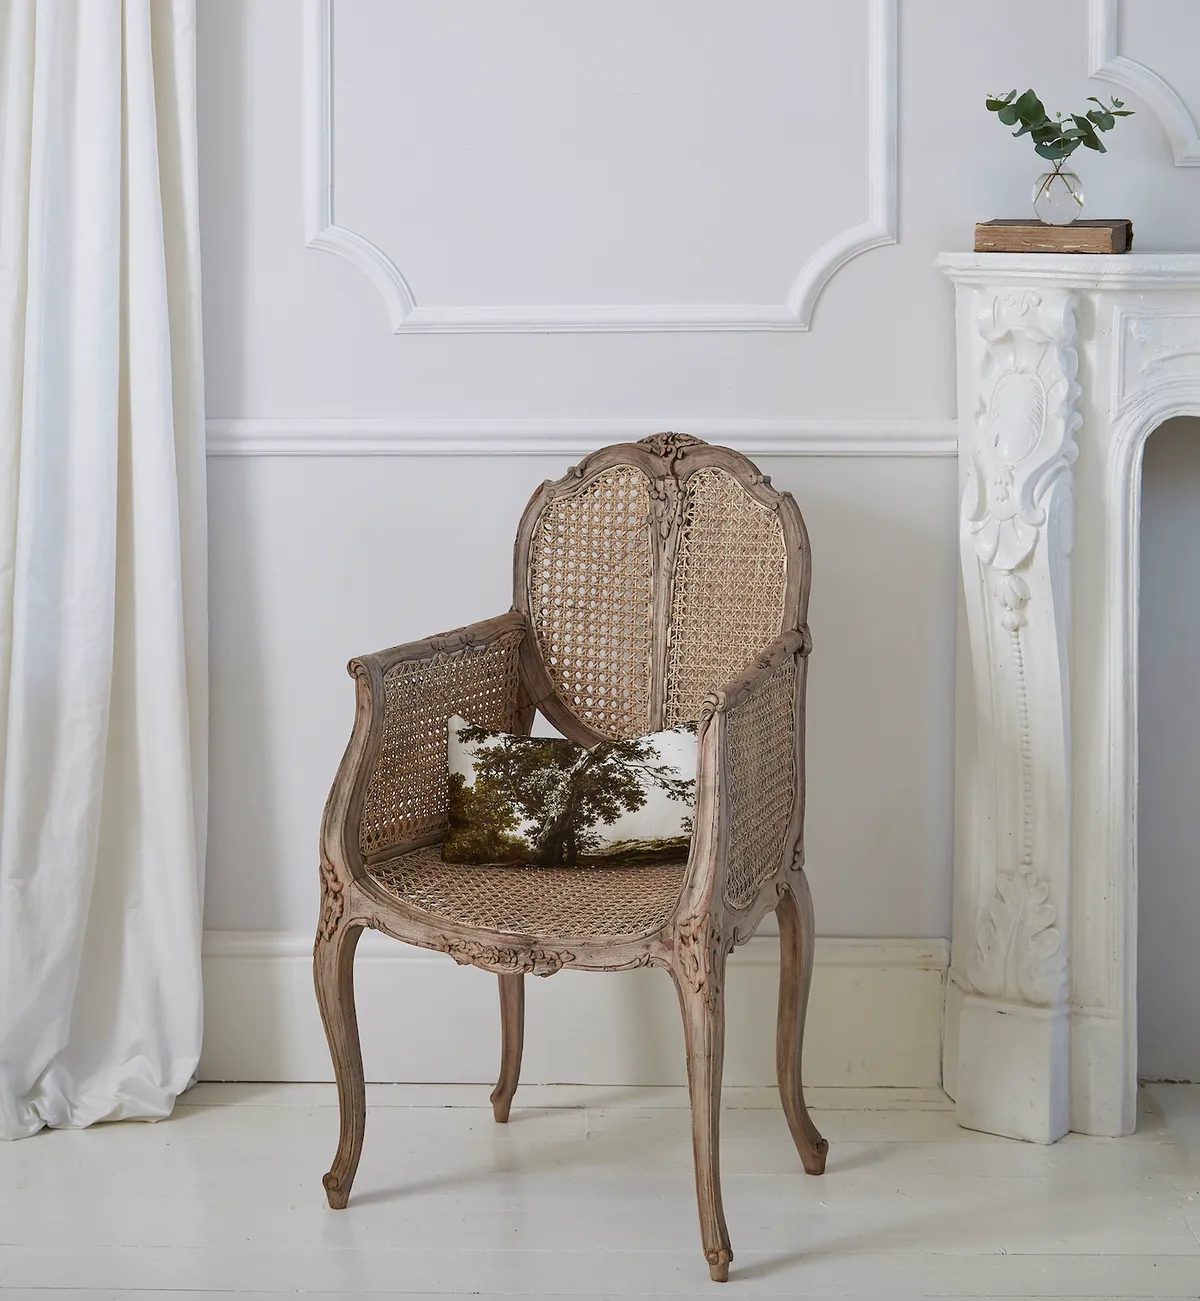 Chateauneuf Rustic Rattan Chair, The French Bedroom Company